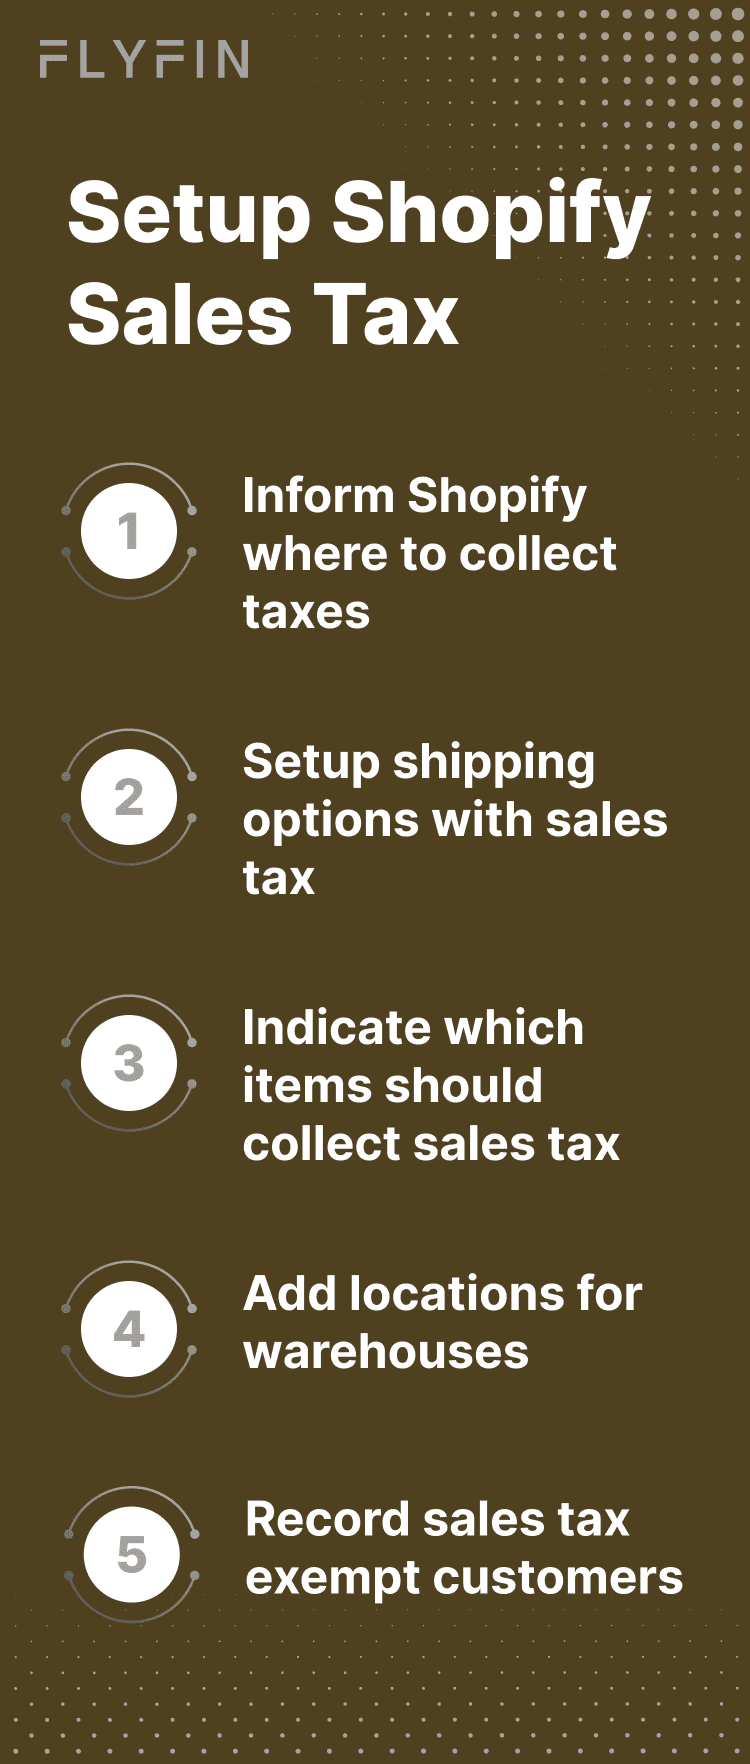 Does Shopify collect sales tax?